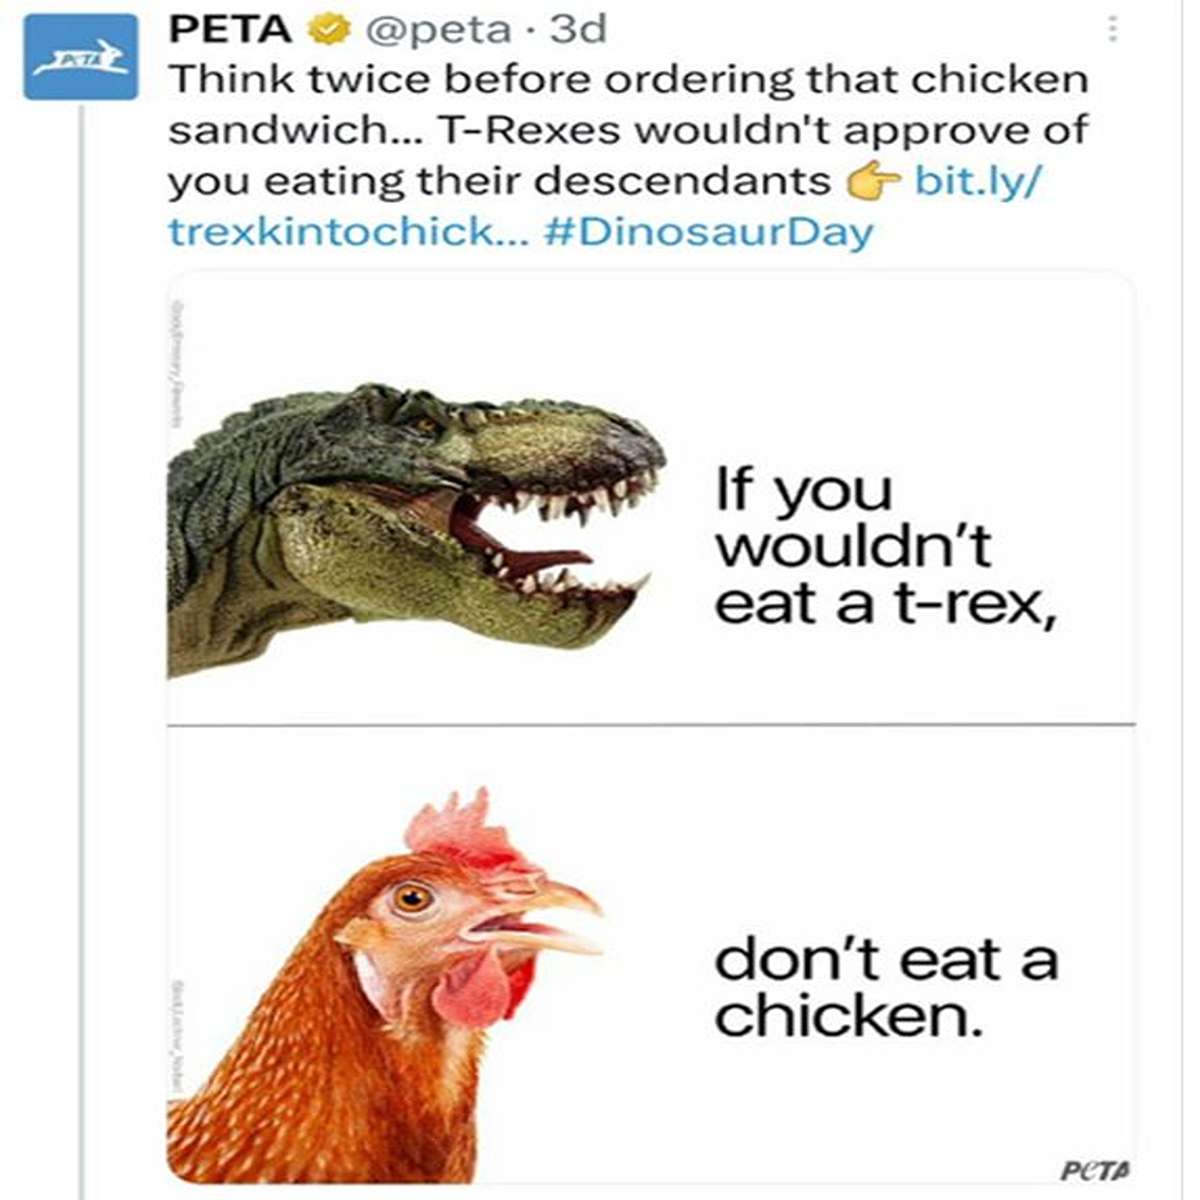 delusional people - fauna - Peta 3d Think twice before ordering that chicken sandwich... TRexes wouldn't approve of you eating their descendants & bit.ly trexkintochick... If you wouldn't eat a trex, don't eat a chicken. Pcta